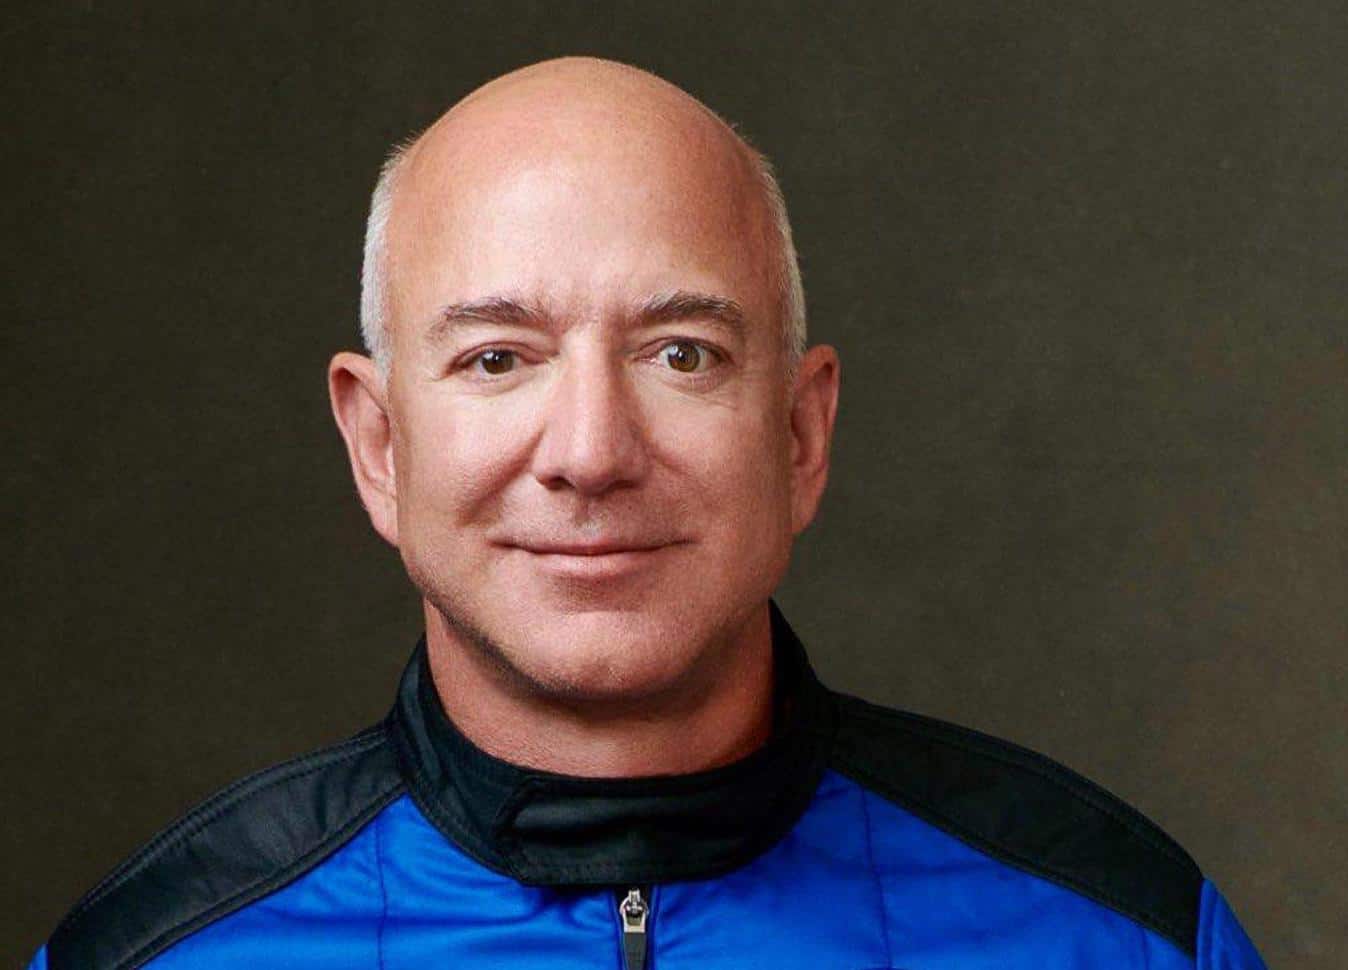 Jeff Bezos under fire after comments about the Queen’s death – reactions